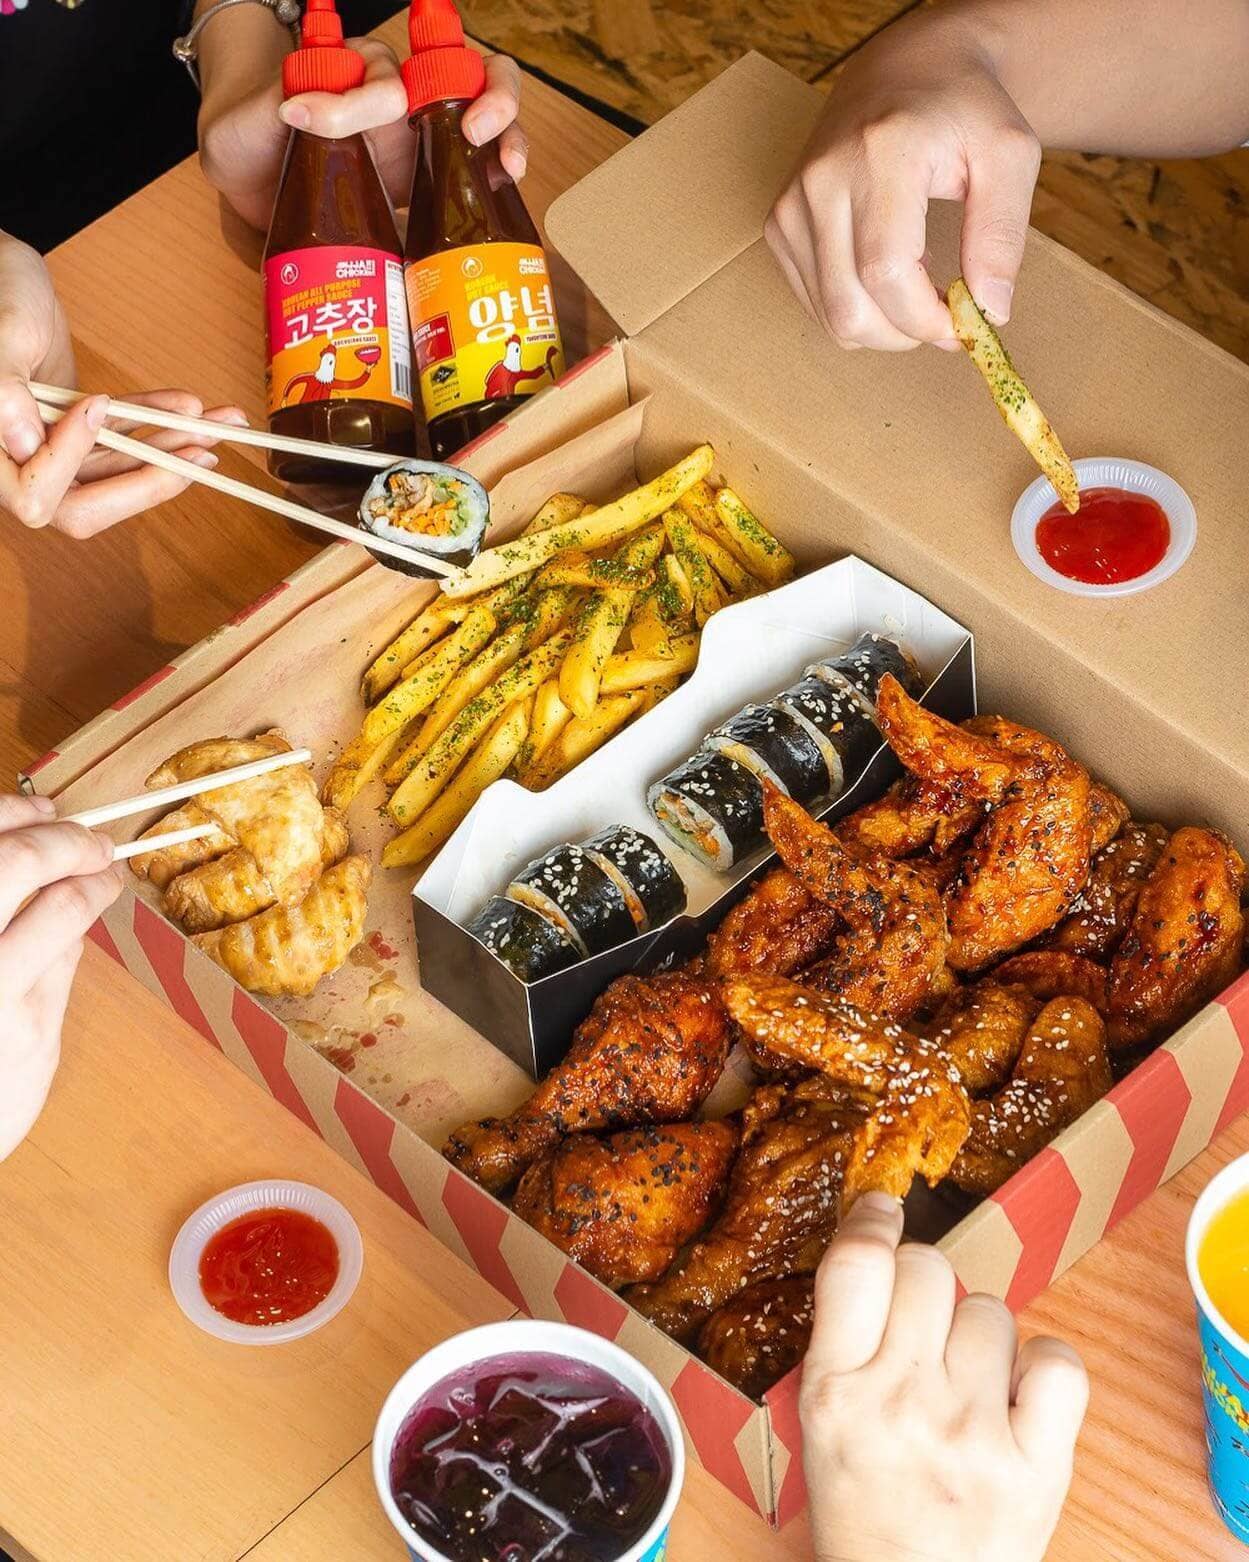 Can’t travel to Korea? Jinjja Chicken brings Korean street food to you – in a delicious box! Jinjja Chicken